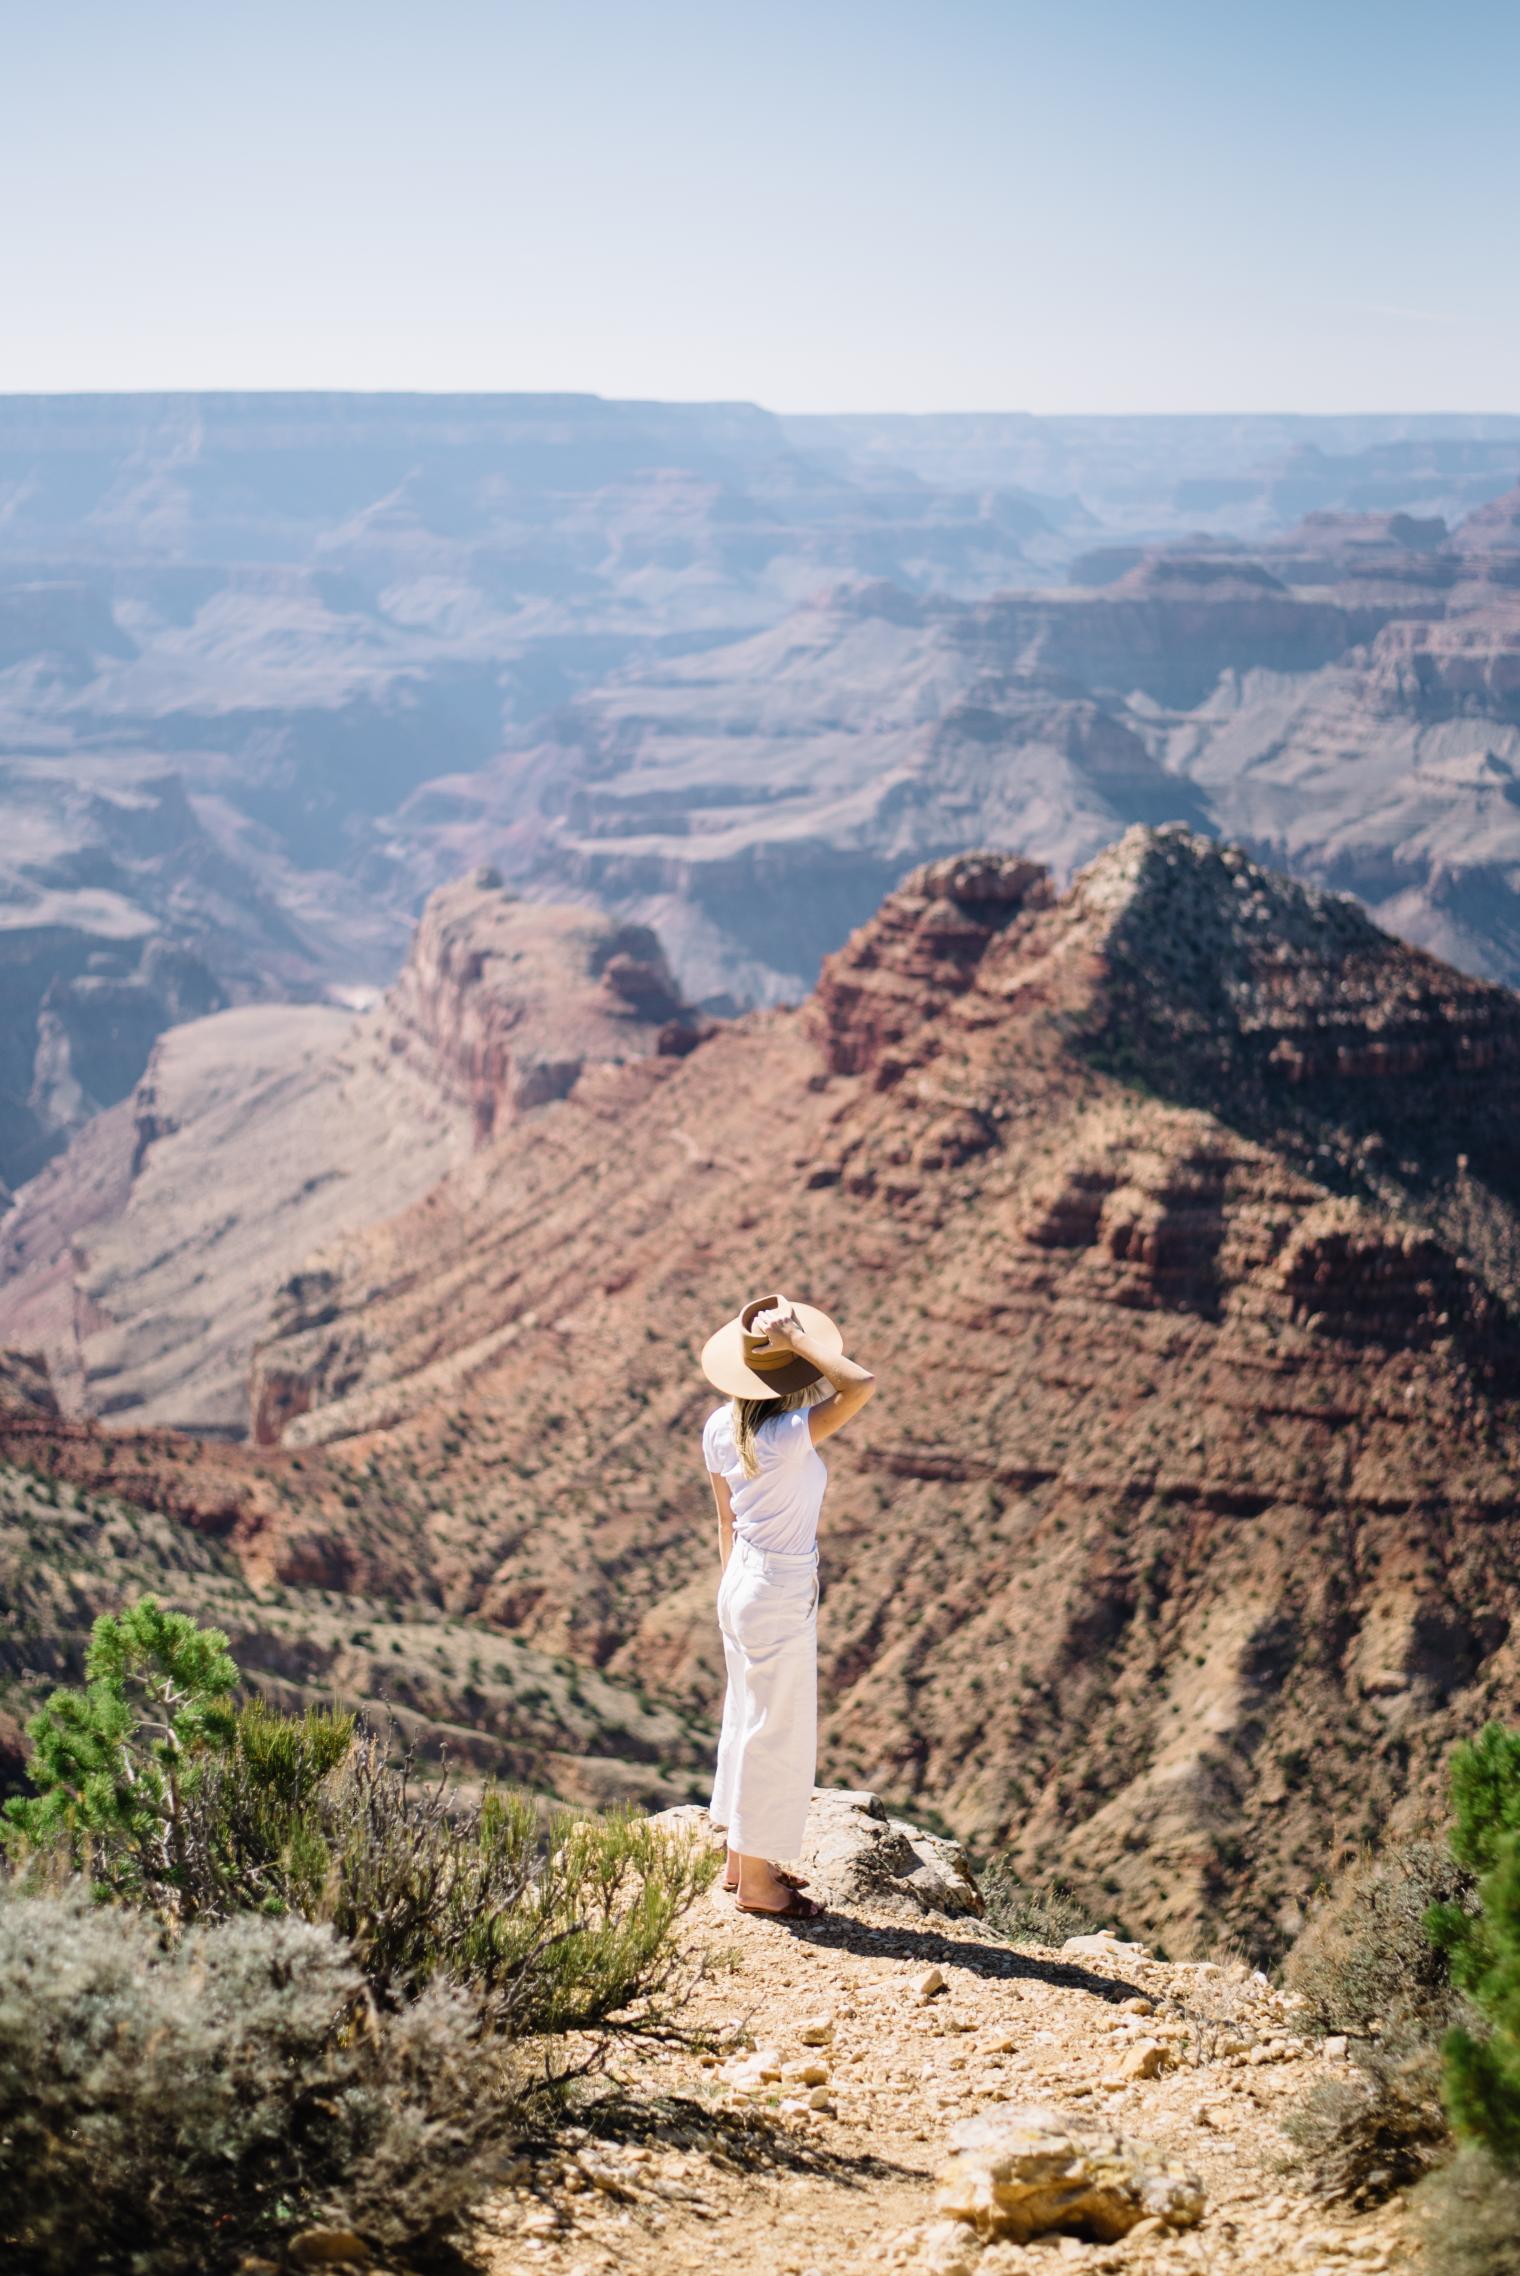 6 Essential To-Do's the Grand Canyon